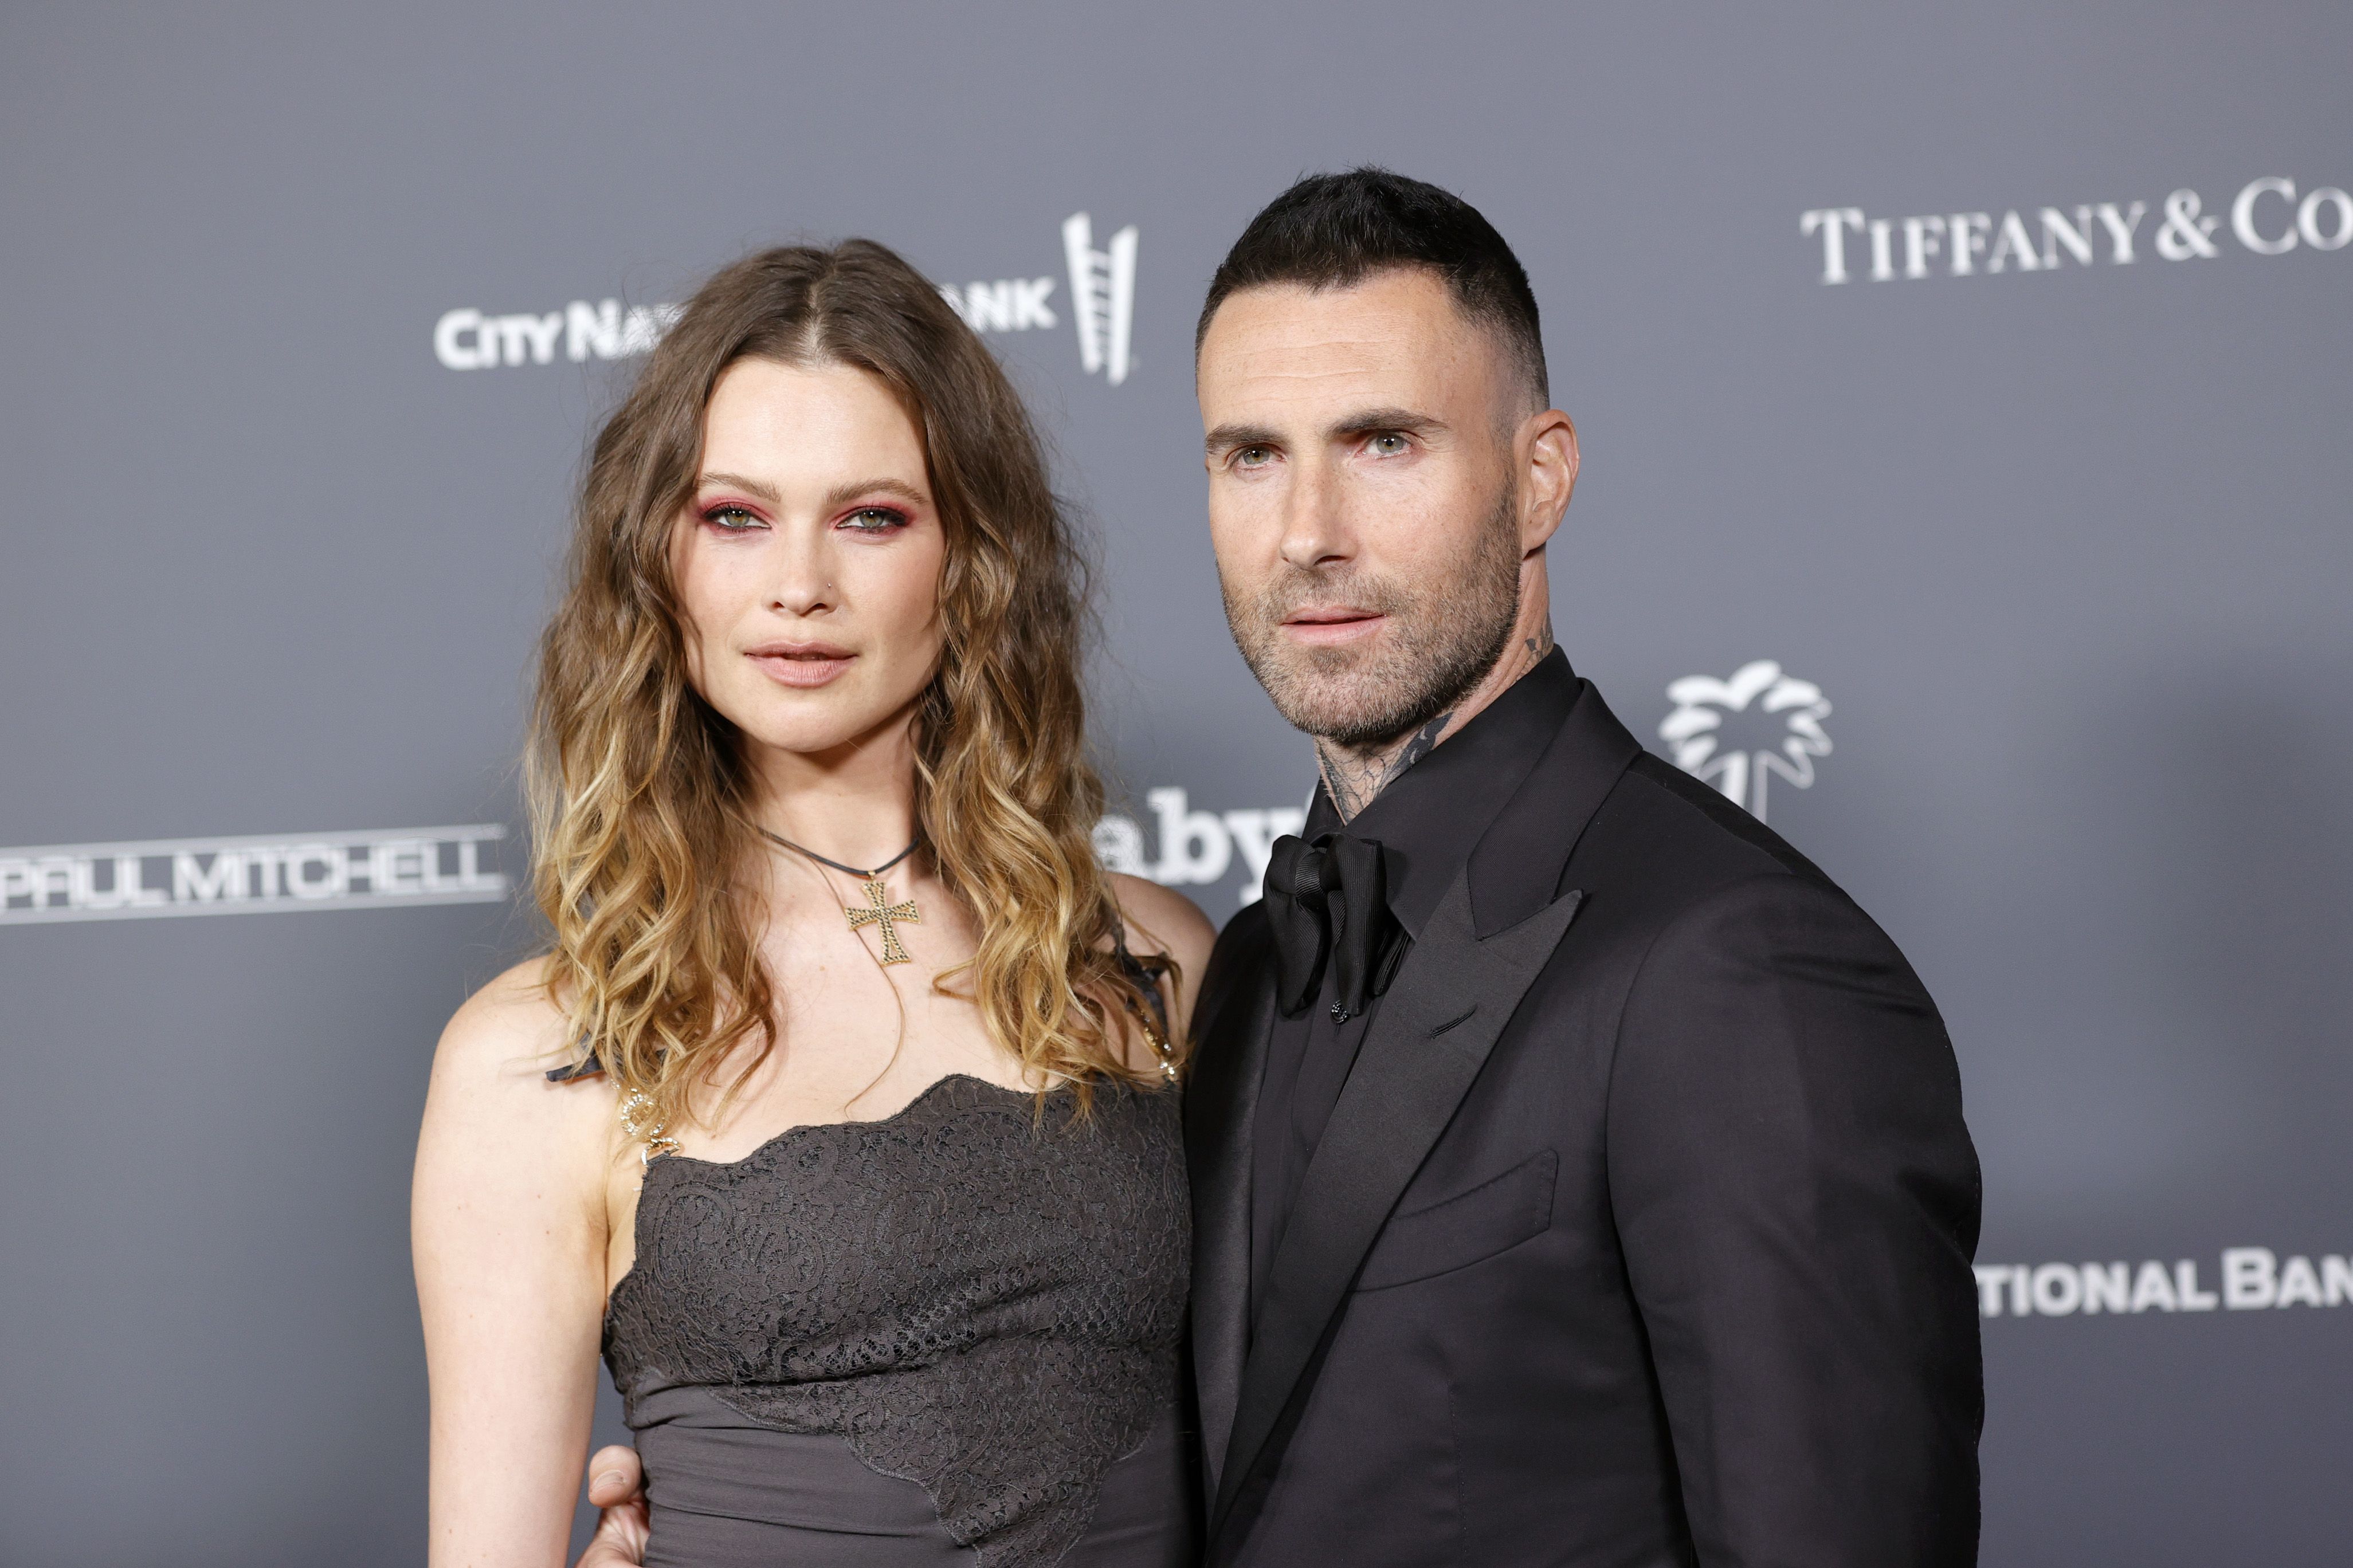 Adam Levine's Fiancee Behati Prinsloo Shows Off Her Engagement Ring -  YouTube